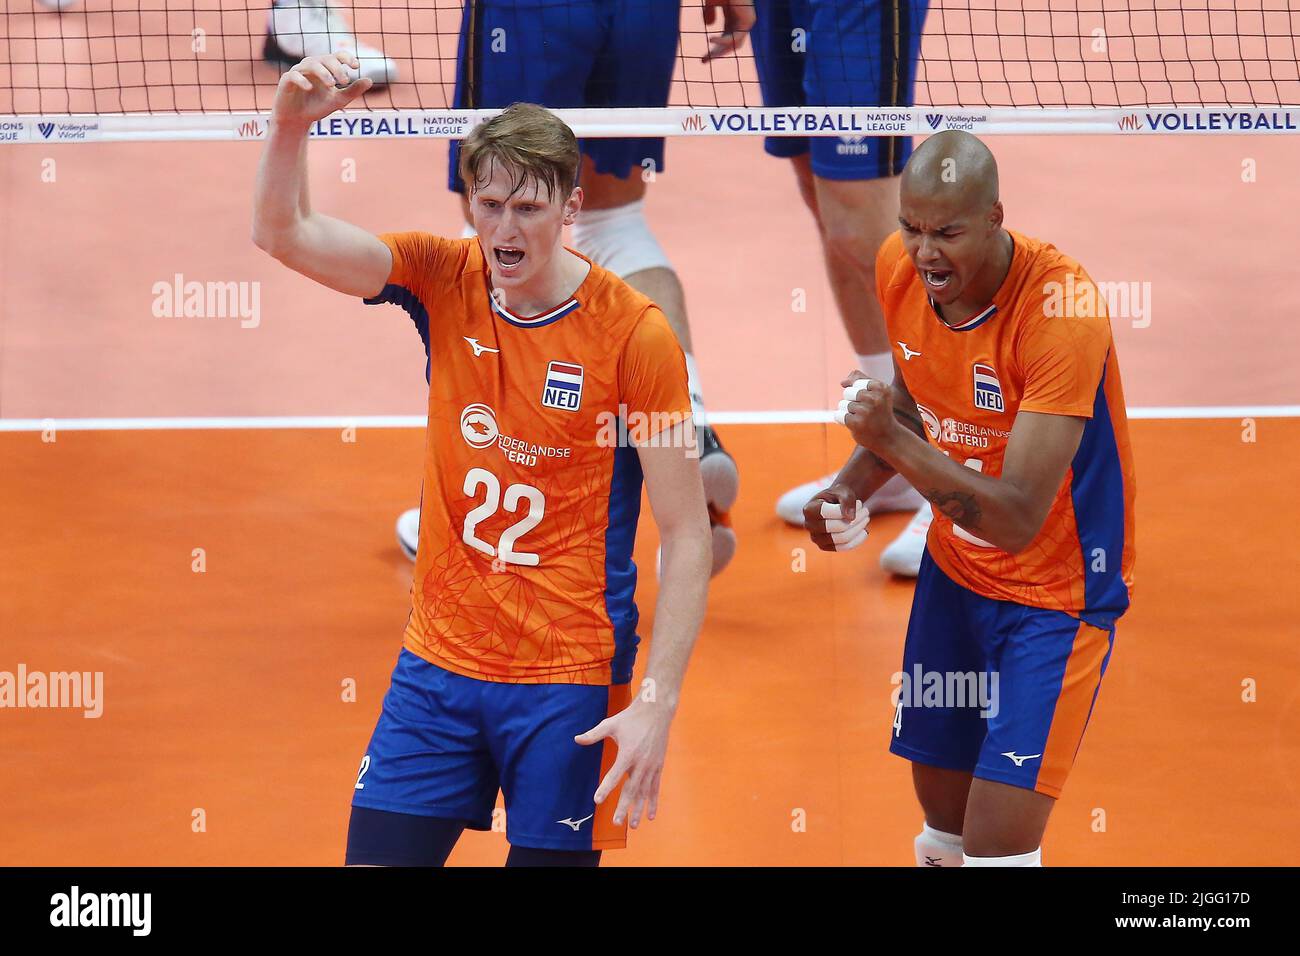 Twan Wiltenburg, Nimir Abdel Aziz during the FIVB Volleyball Nations League  Men's Pool 6 match between Italy and Netherlands in Gdansk, Poland on July  10, 2022. (Photo by Piotr Matusewicz/PressFocus/SIPA USA) France